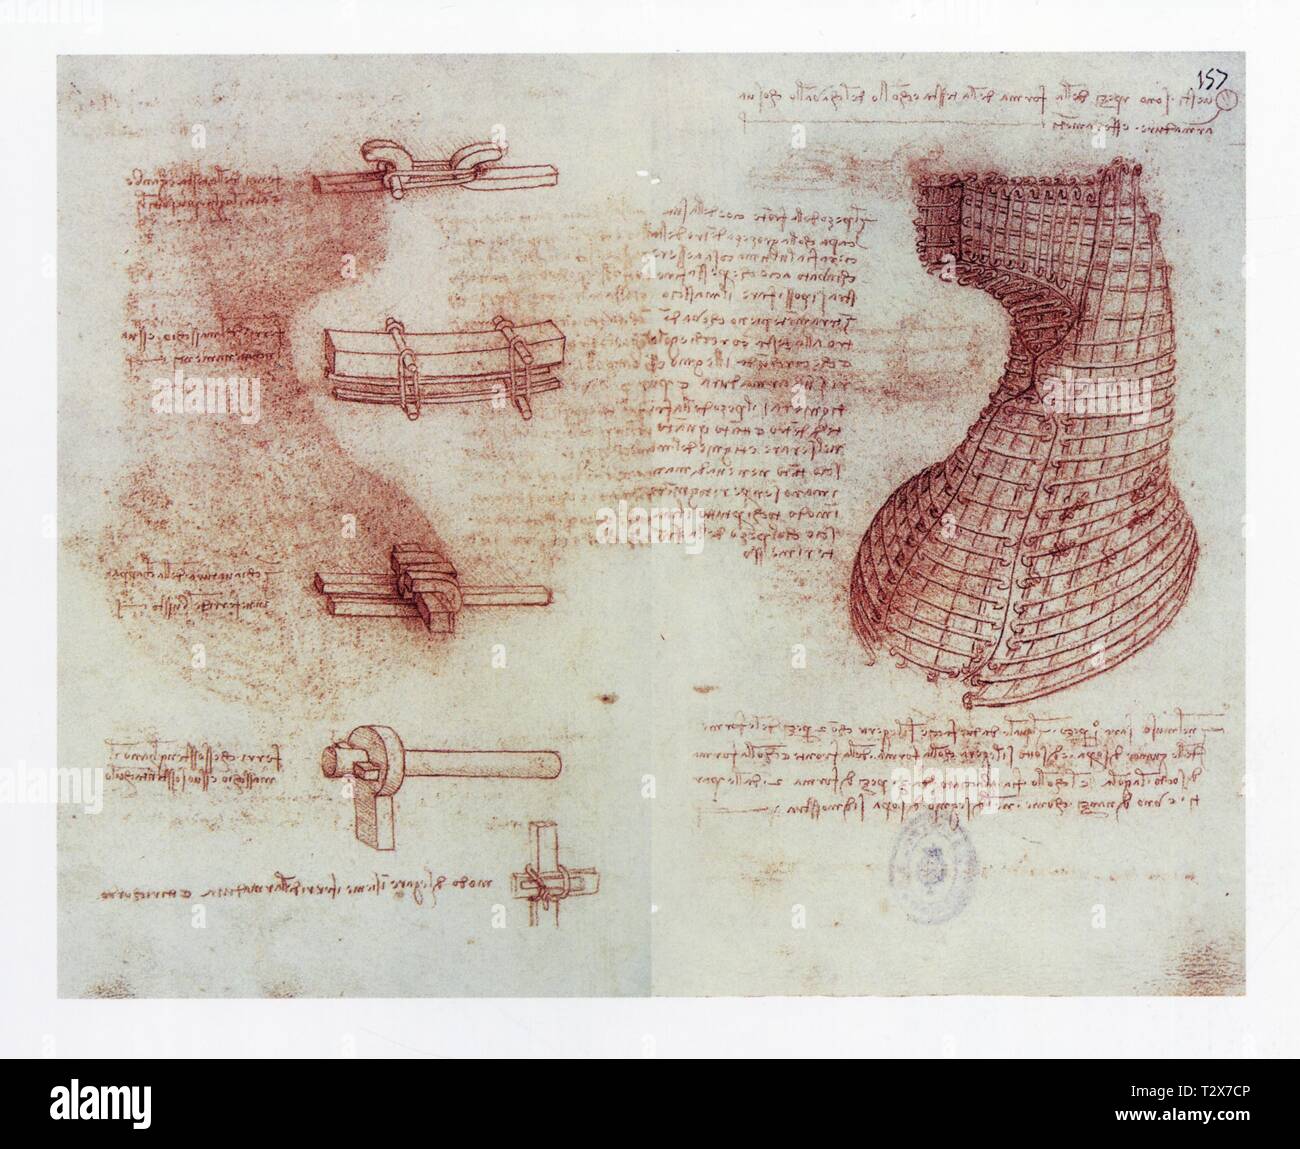 LEONARDO DA VINCI. DEVICE FOR SECURING THE PIECE MOULD OF A HORSE'S HEAD FOR CASTING. 1491-1493. RED CHALK. 220 MM X 300 MM Stock Photo